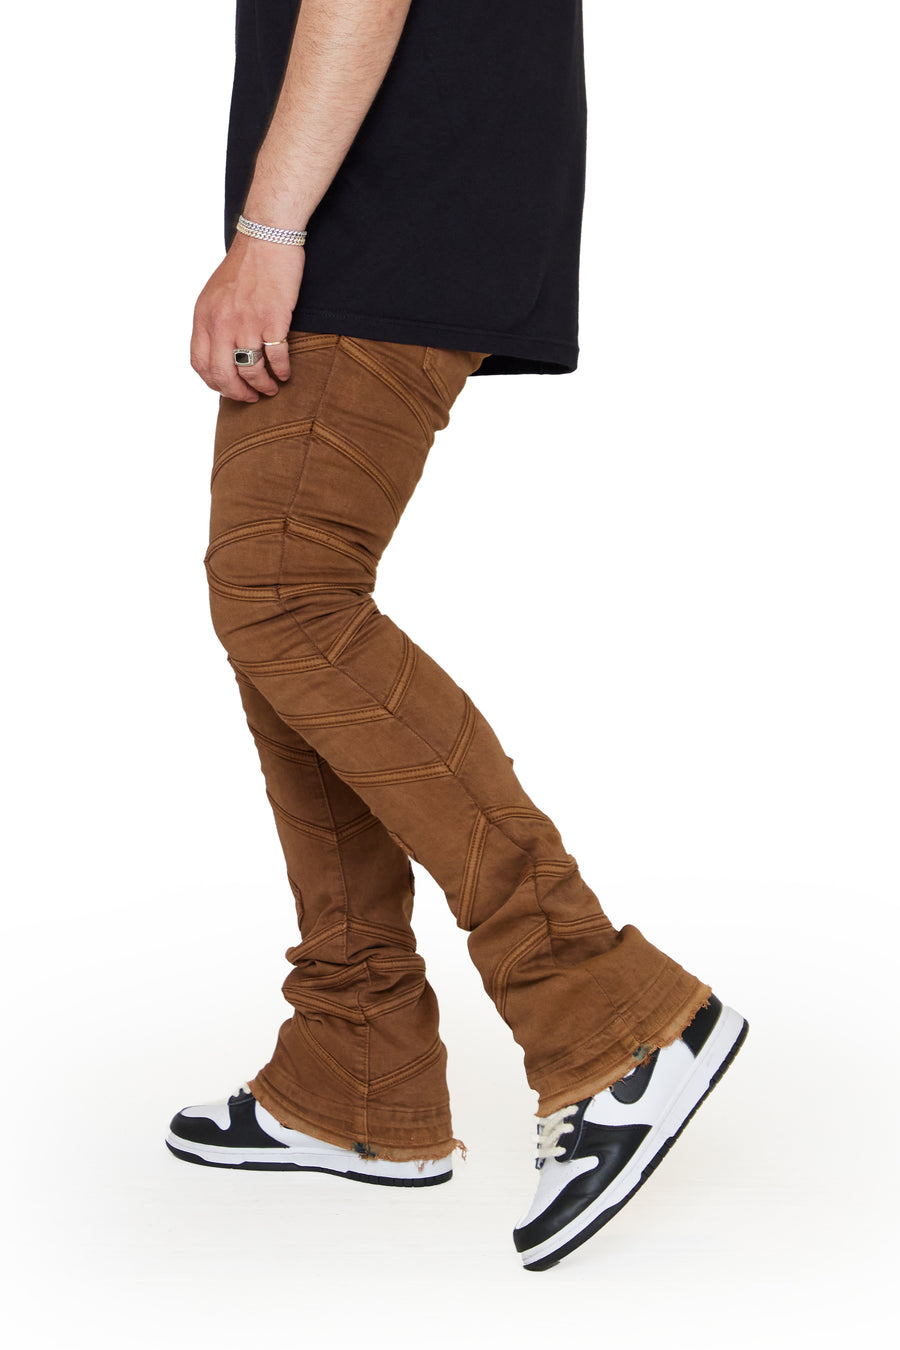 “CASSIUS” LT. BROWN STACKED FLARE JEAN